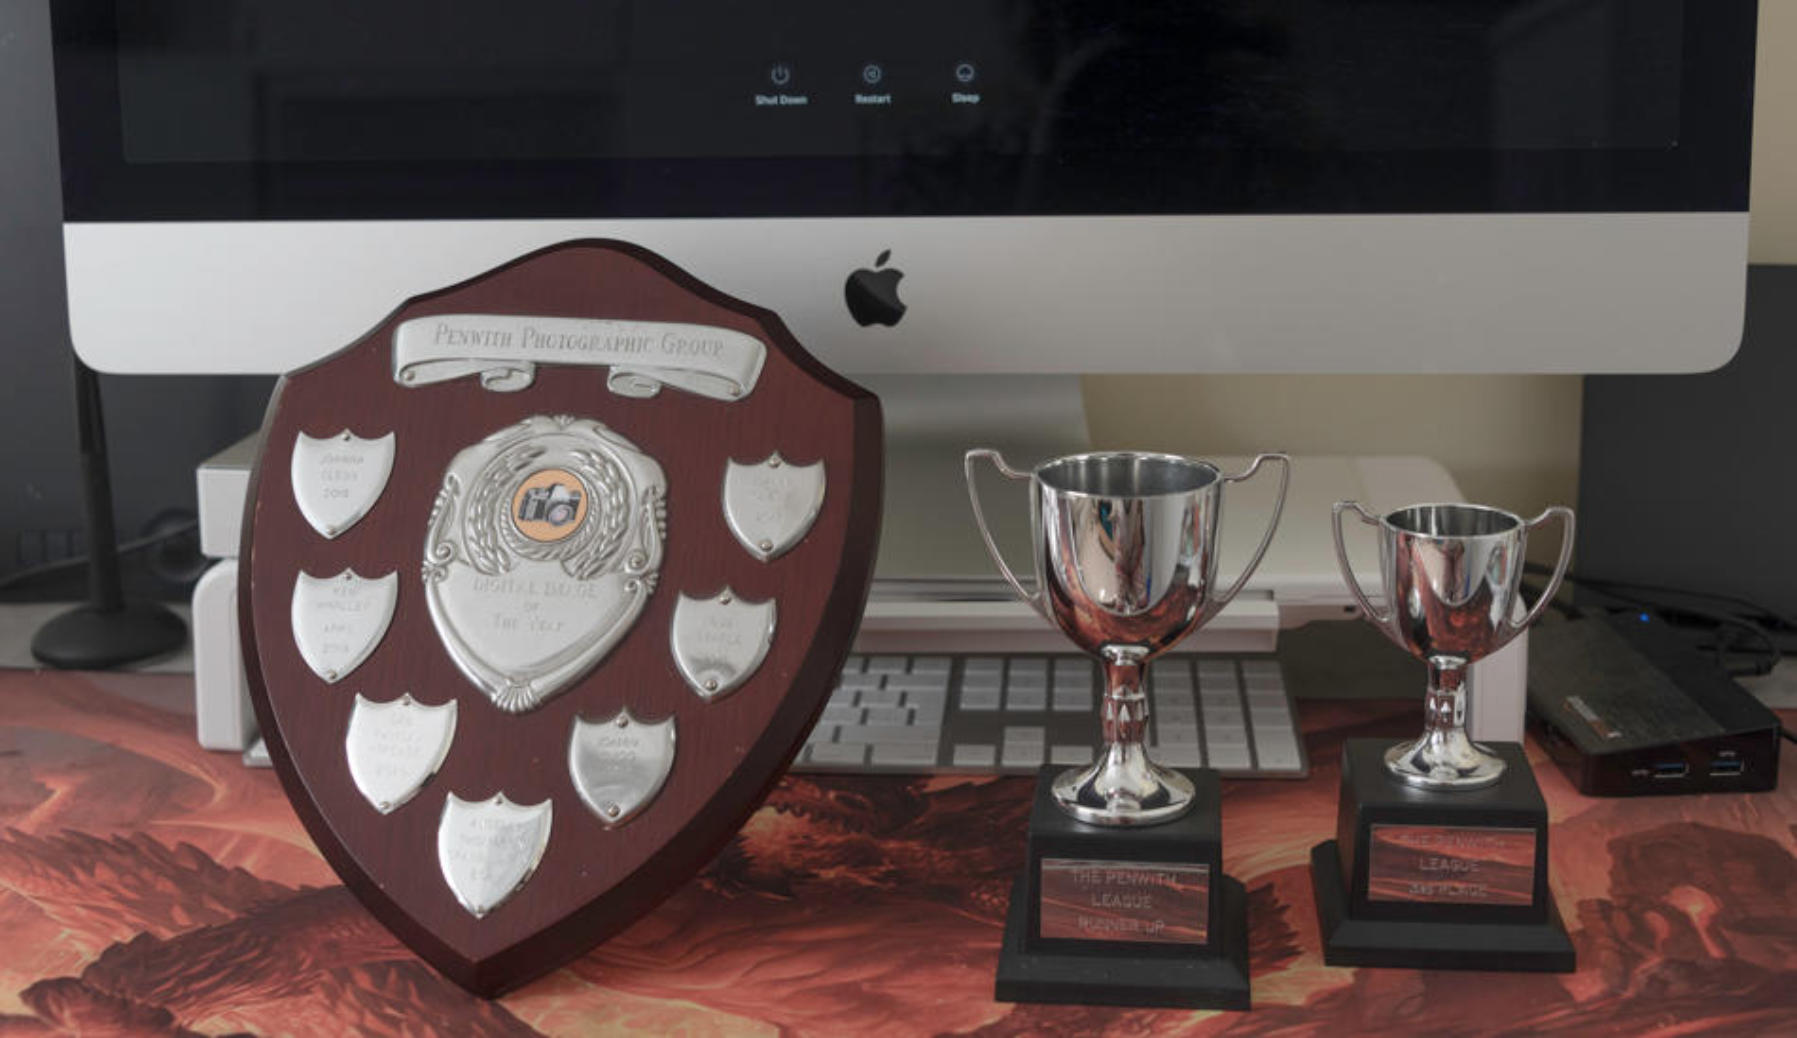 Awards From Penwith Photographic Group